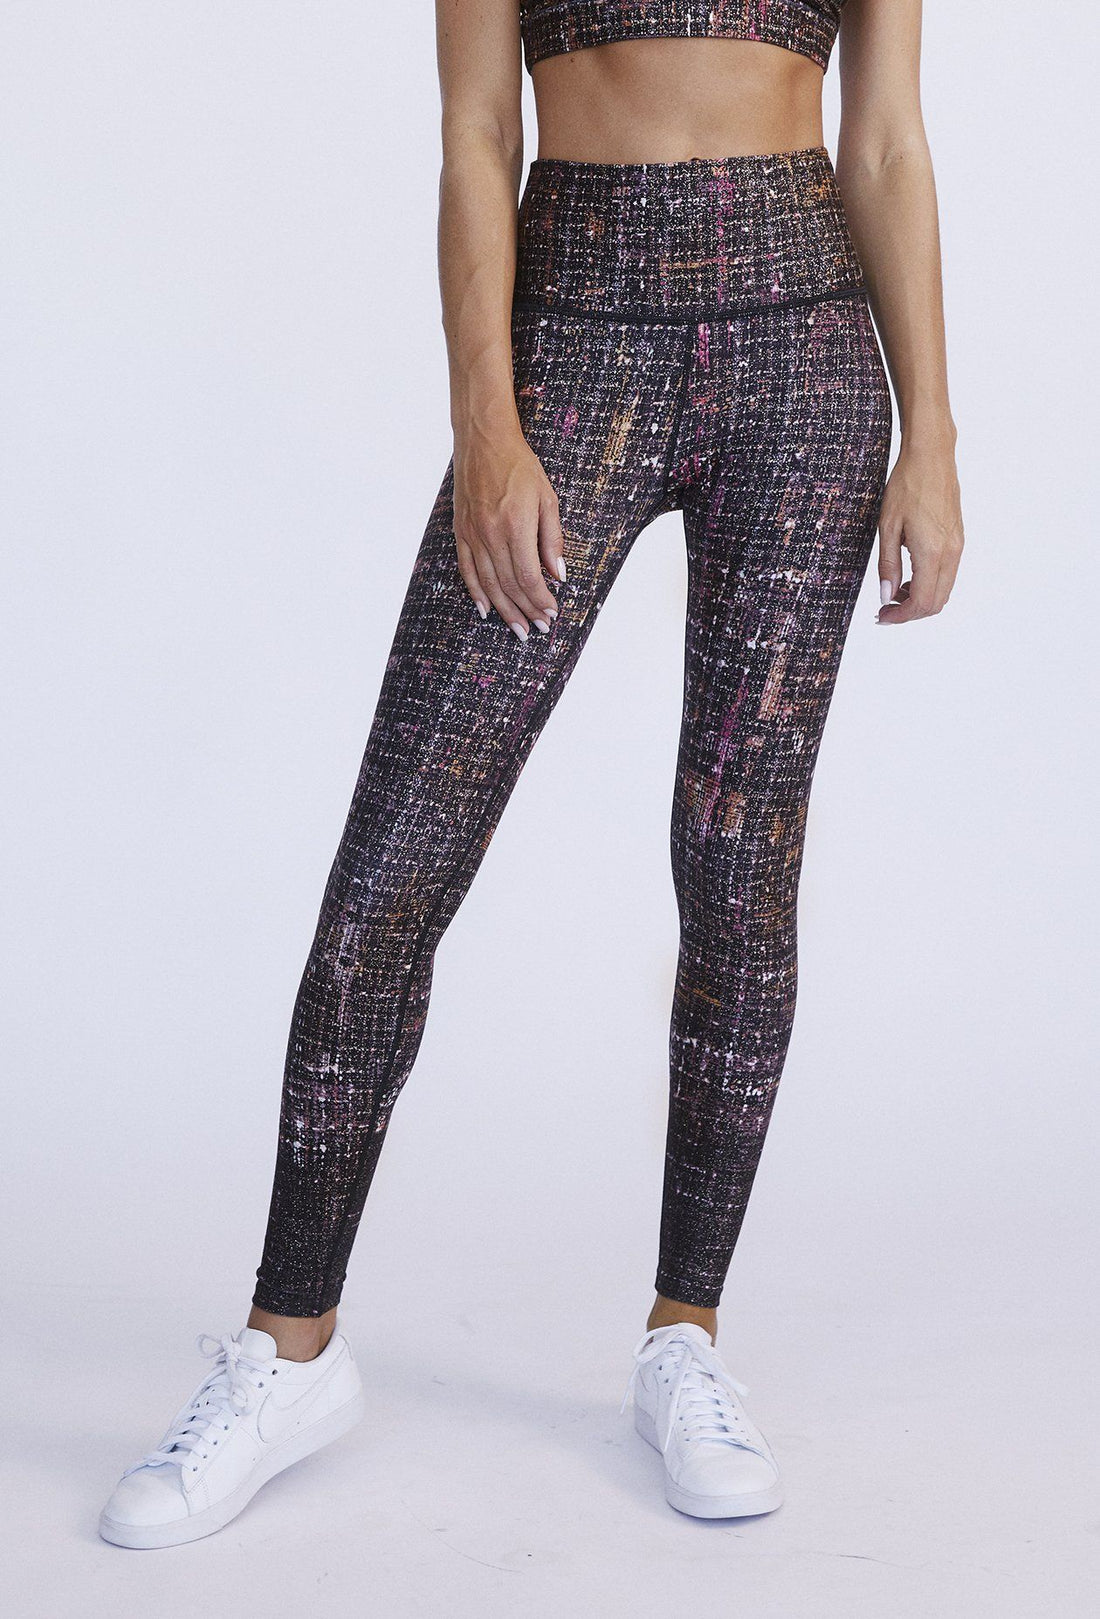 High Waisted Leggings Sunrise Tweed With Foil PANTS W.I.T.H.-Wear It To Heart SUNRISE TWEED XS 